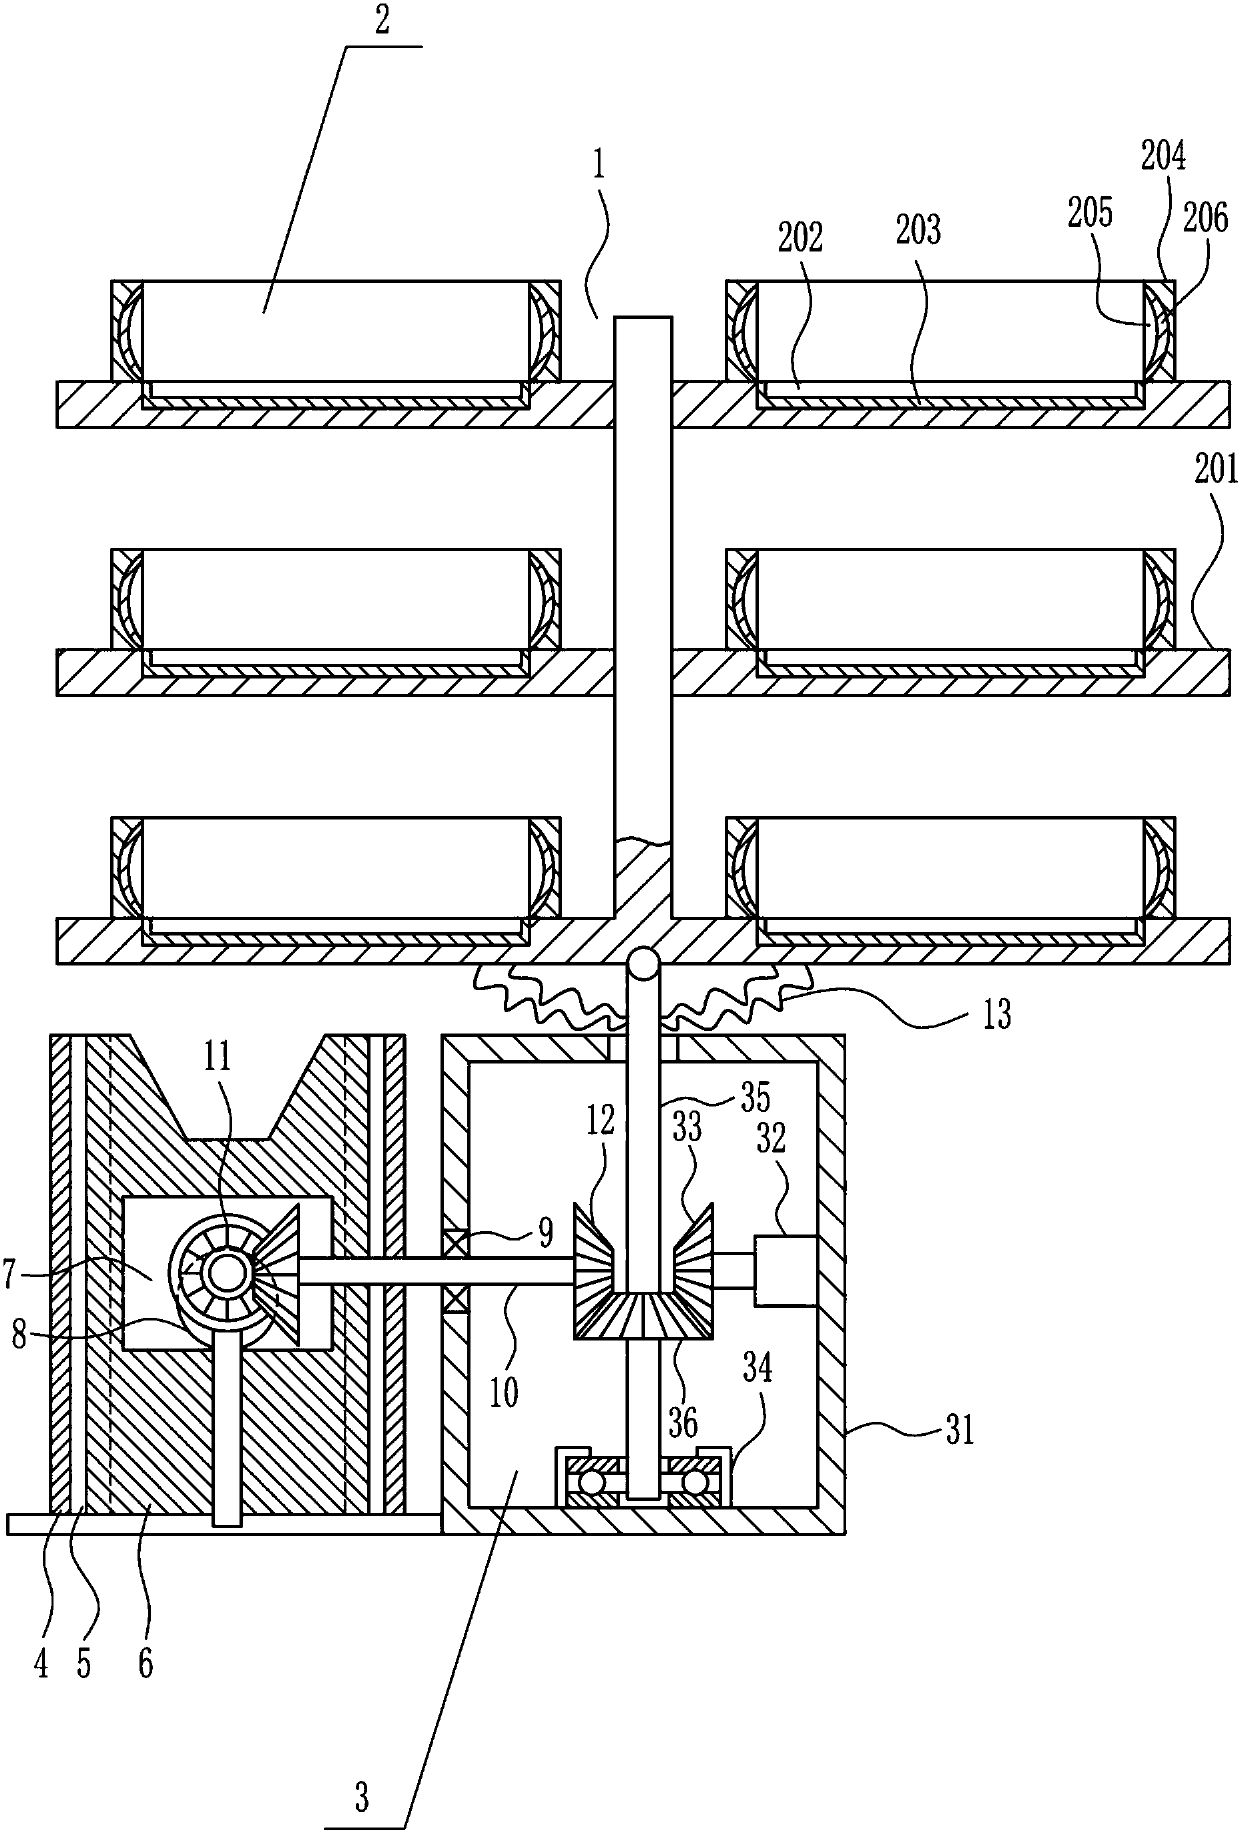 Electric vehicle model rotary type showing device for electric vehicle